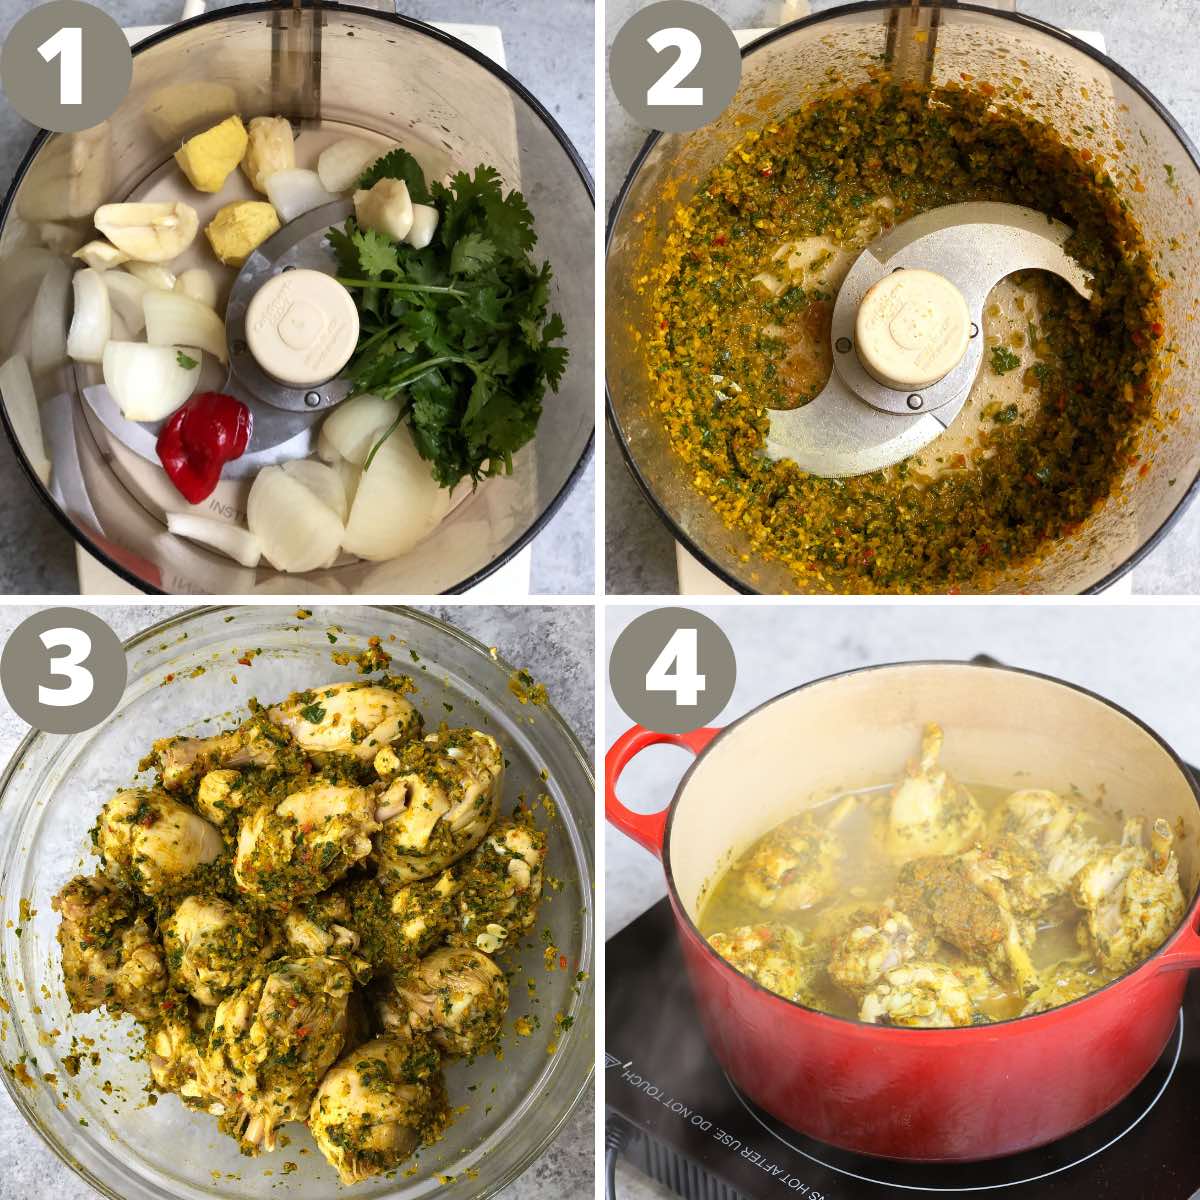 The key steps for making curry chicken: making the paste, coating the chicken and cooking in a pot